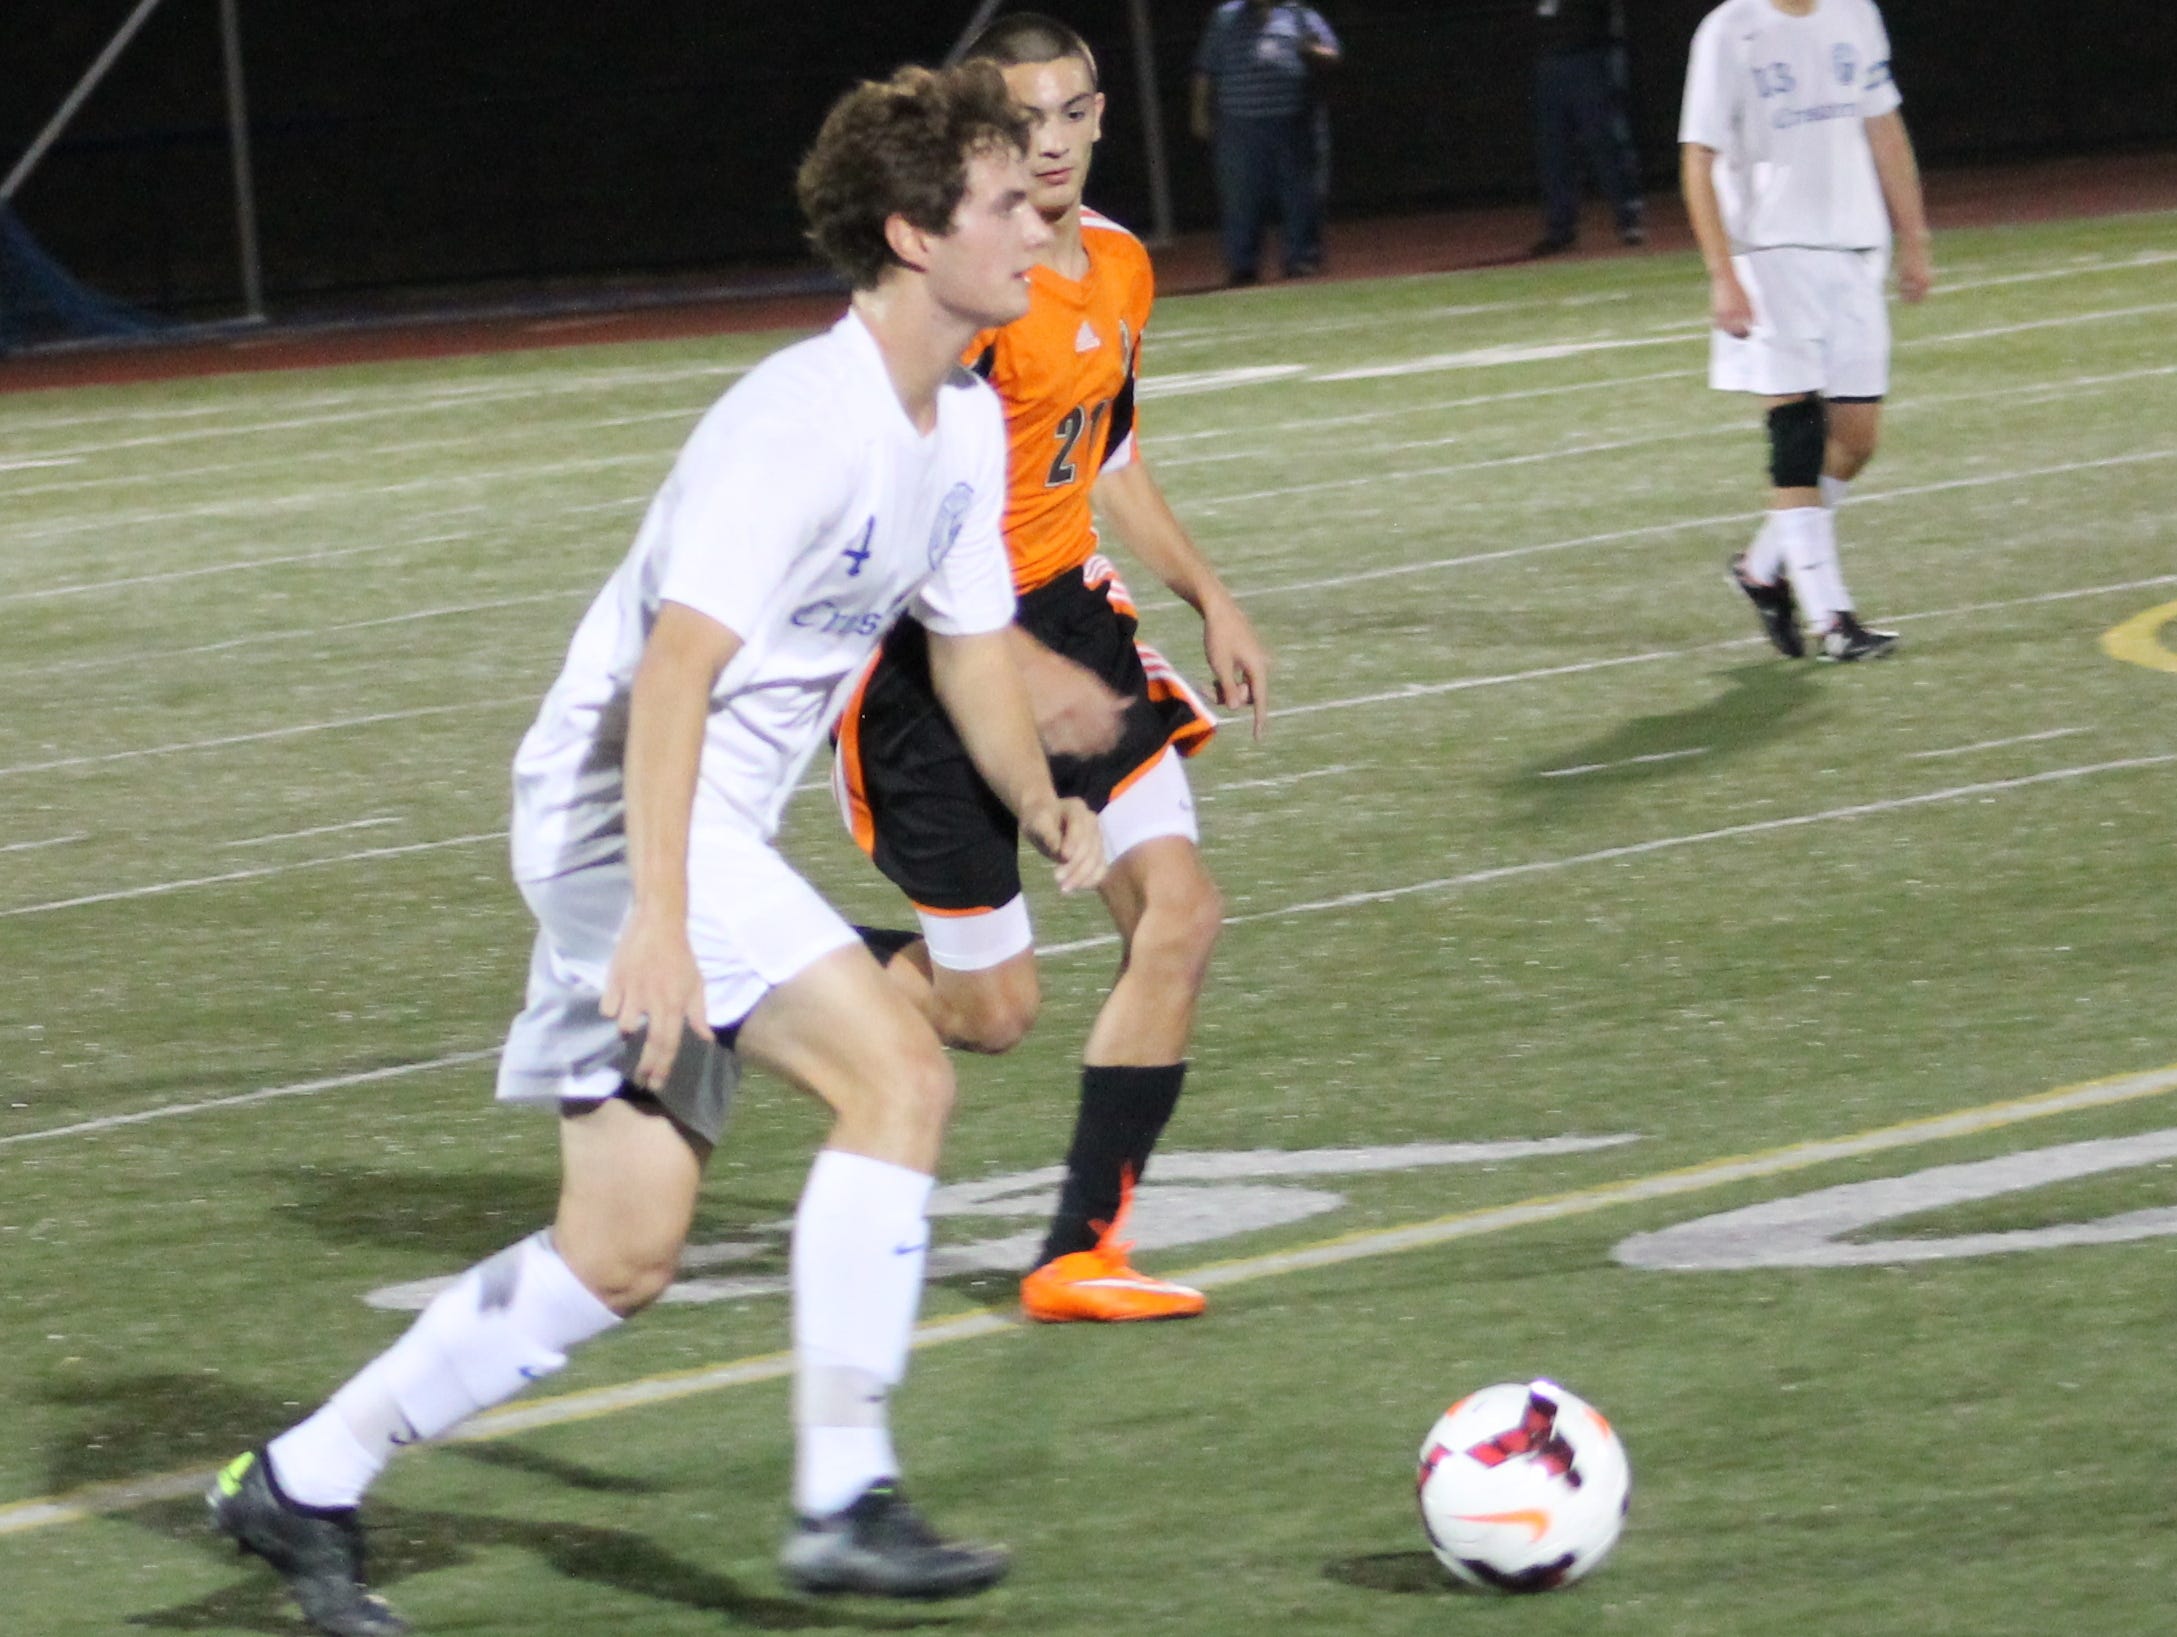 Senior Charles Chuey brings the ball up for Moeller with Beavercreek's Dominic Calabrese in pursuit.